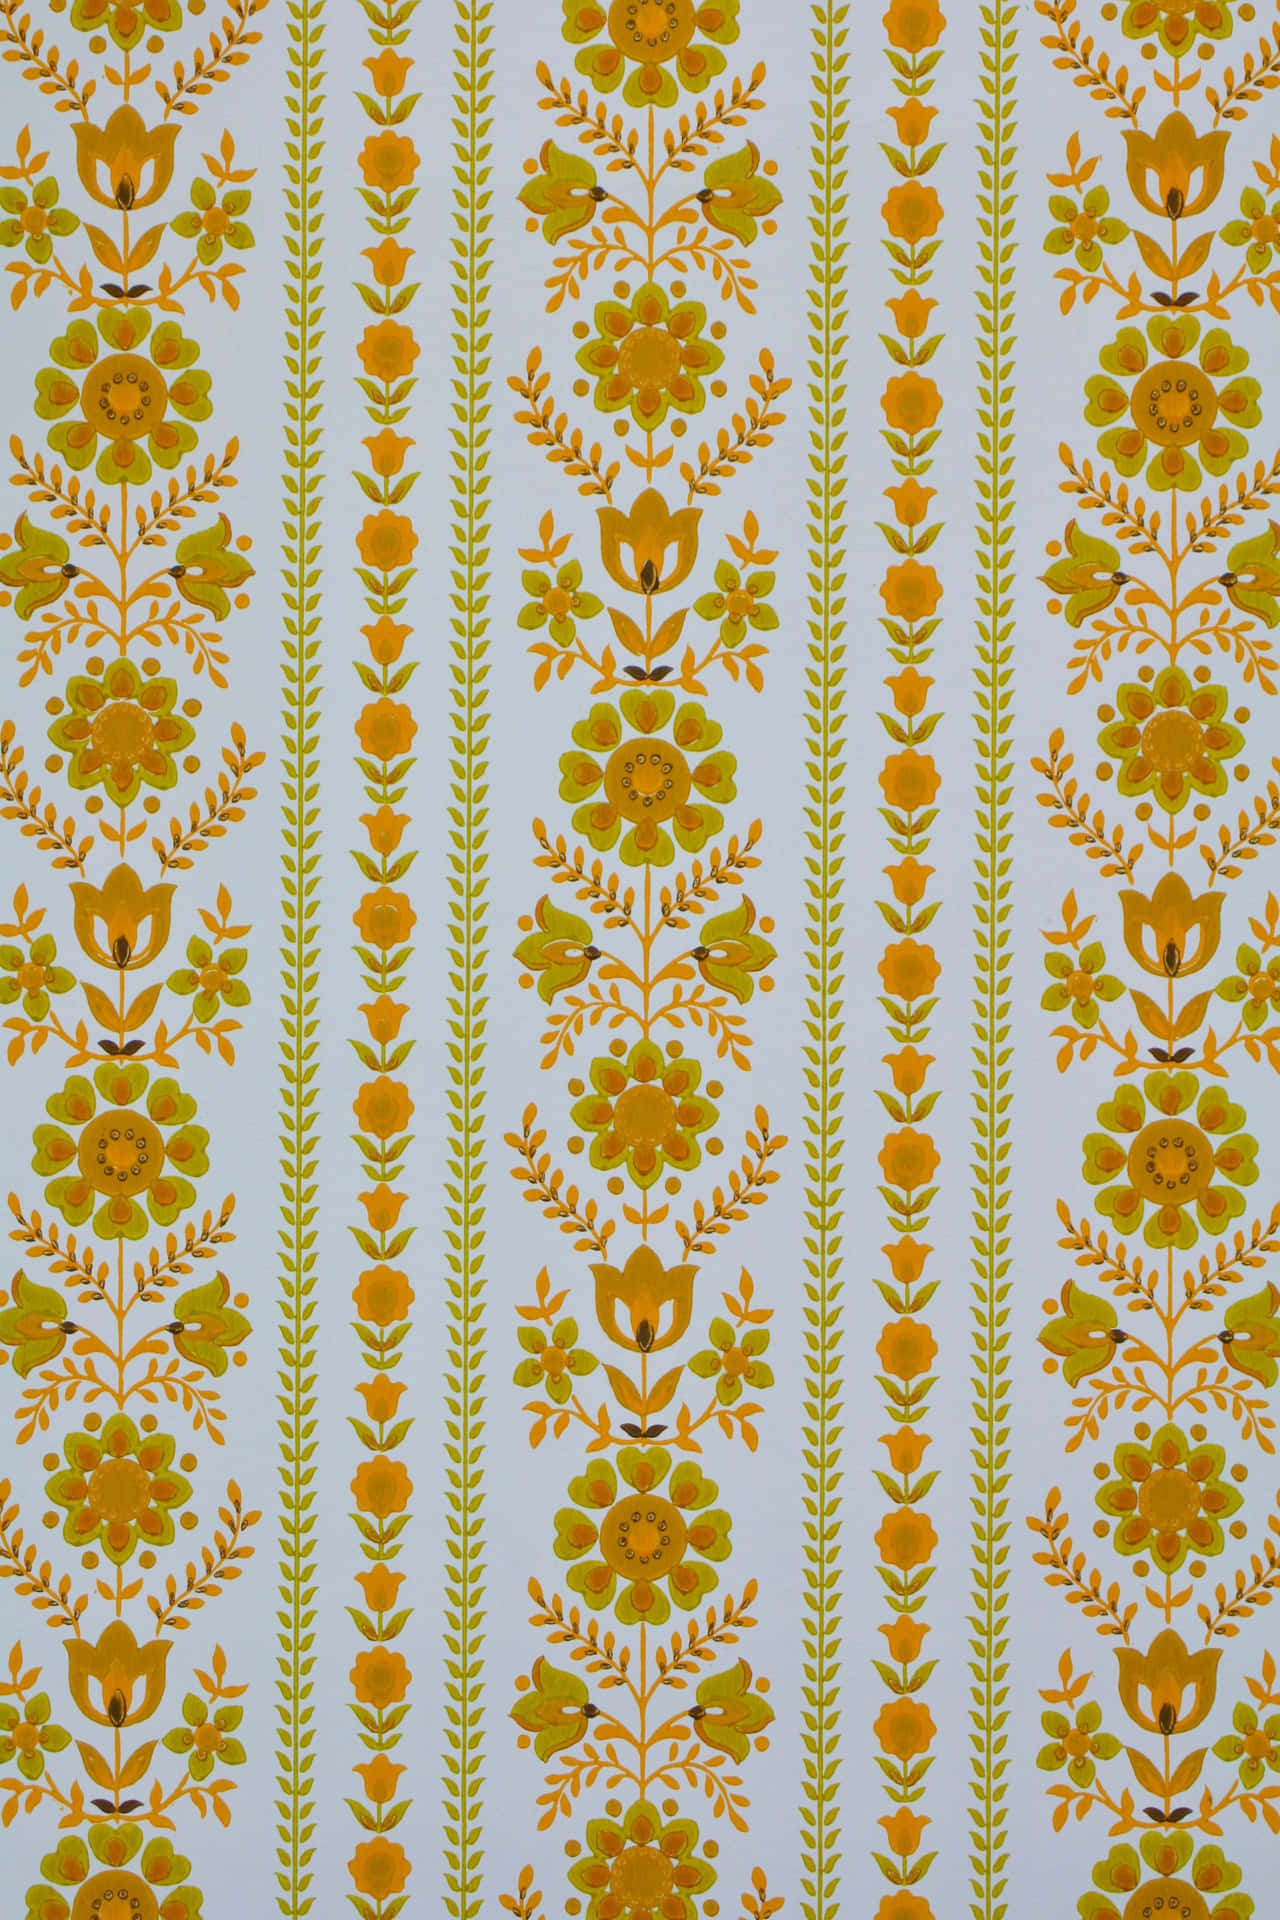 Revive the style and essence of the 1960s Wallpaper